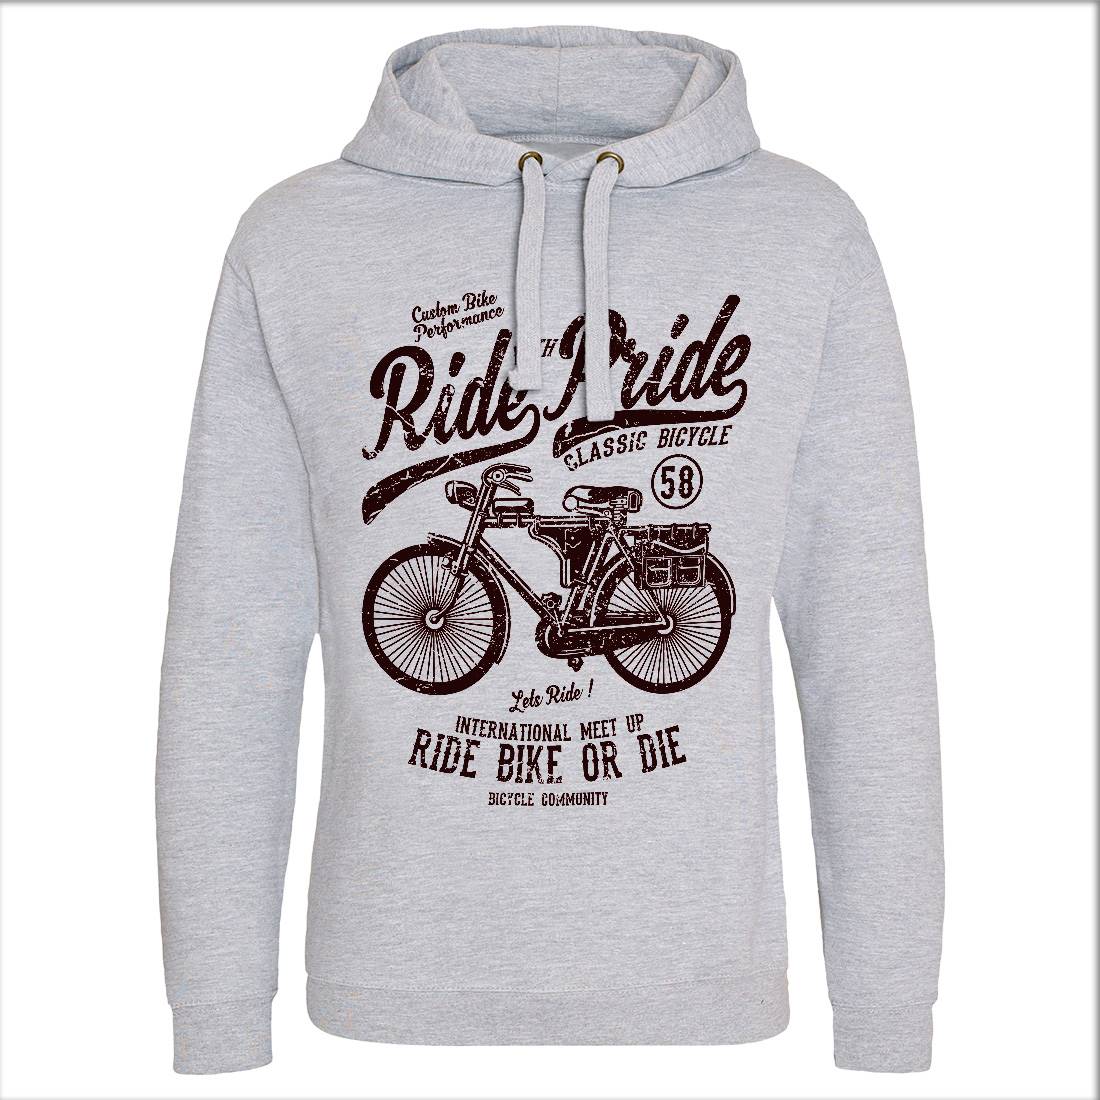 Ride With Pride Mens Hoodie Without Pocket Bikes A121